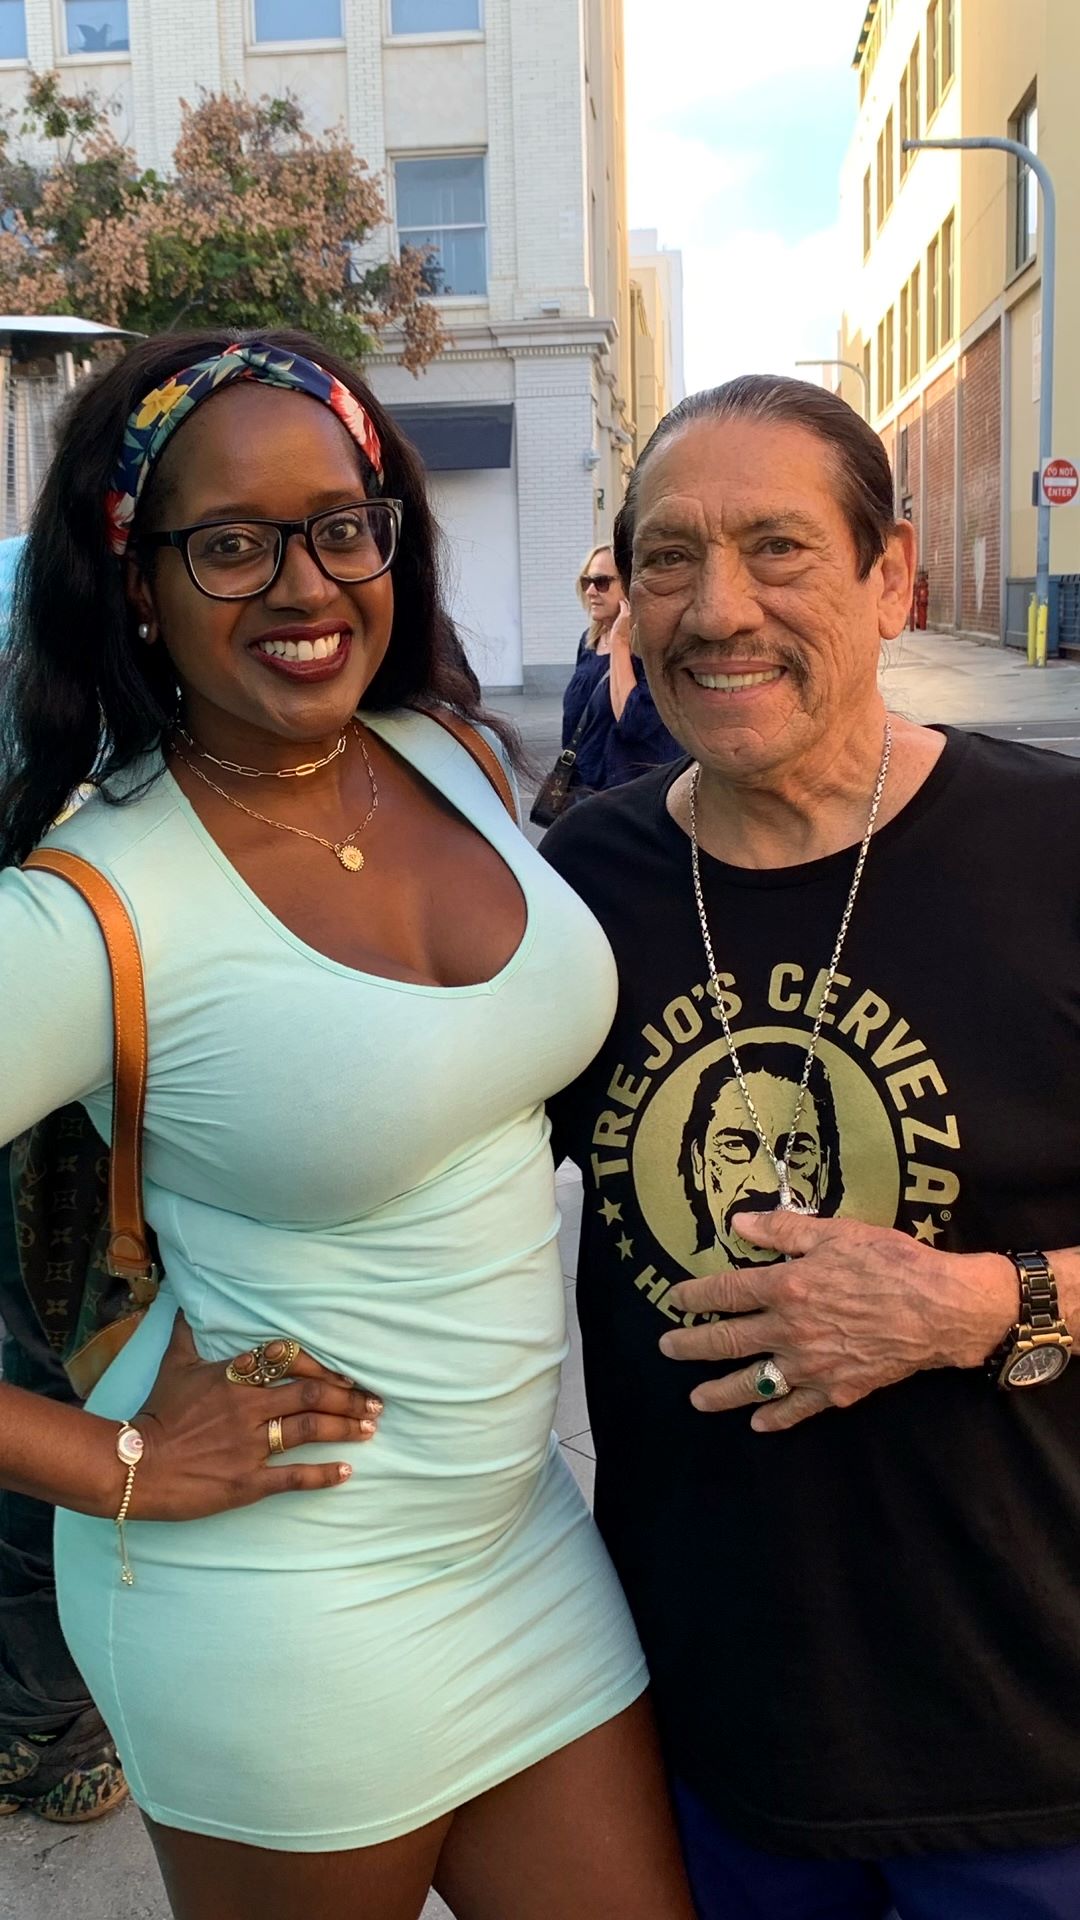 An image of Danny Trejo with Ariel.